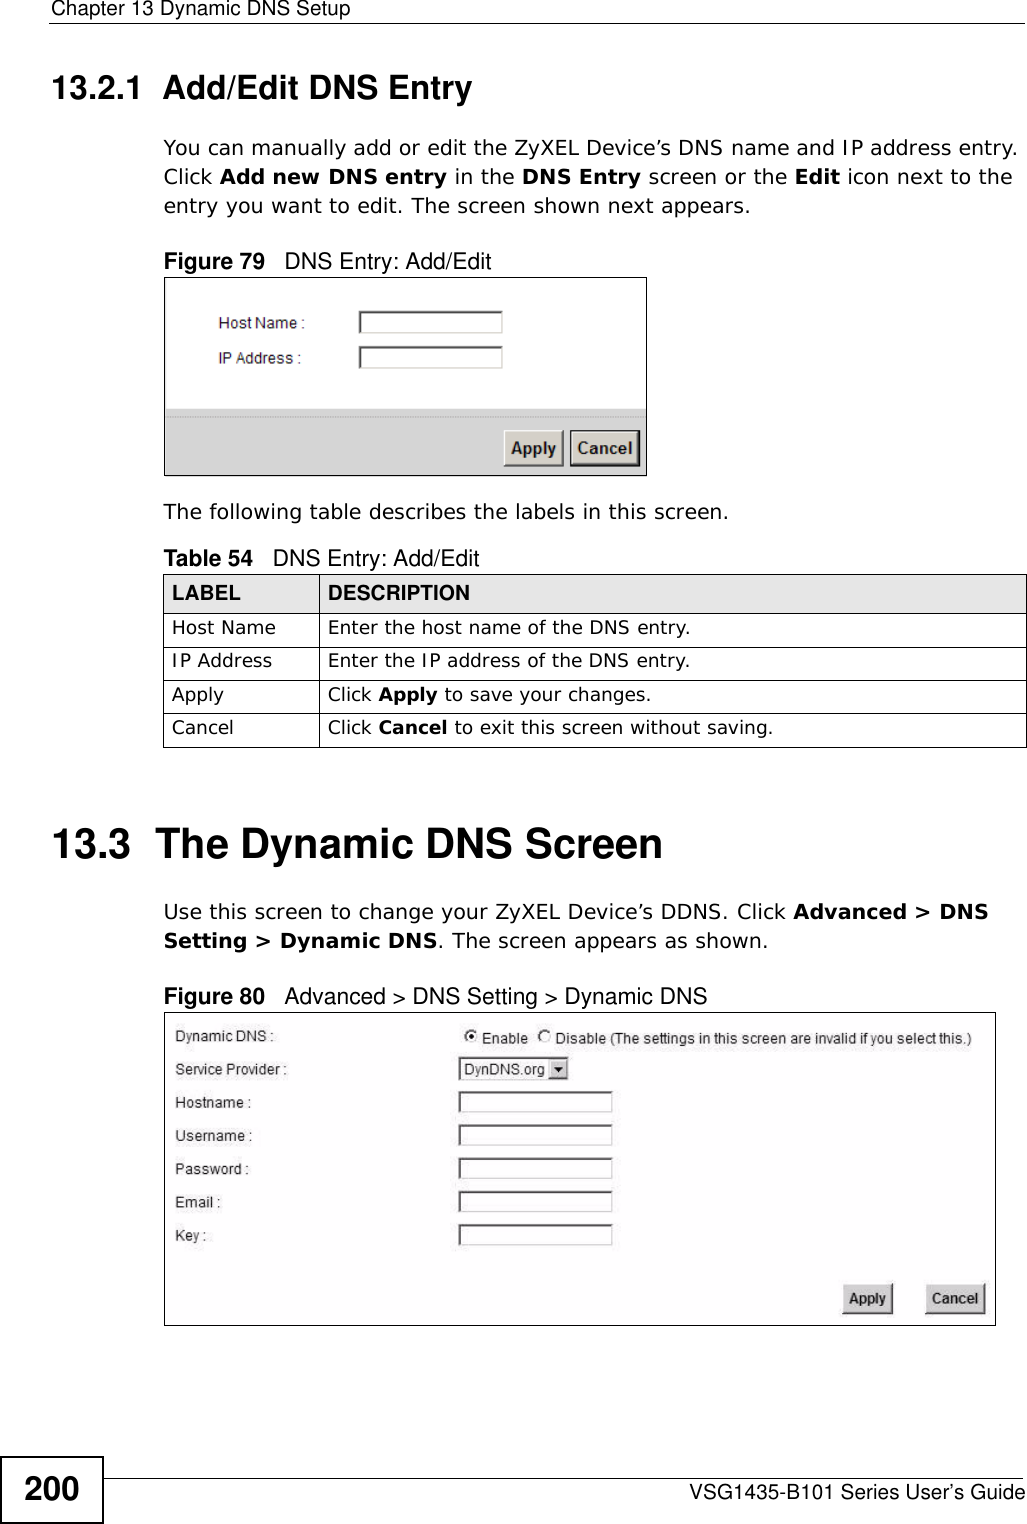 Chapter 13 Dynamic DNS SetupVSG1435-B101 Series User’s Guide20013.2.1  Add/Edit DNS EntryYou can manually add or edit the ZyXEL Device’s DNS name and IP address entry. Click Add new DNS entry in the DNS Entry screen or the Edit icon next to the entry you want to edit. The screen shown next appears.Figure 79   DNS Entry: Add/EditThe following table describes the labels in this screen. 13.3  The Dynamic DNS ScreenUse this screen to change your ZyXEL Device’s DDNS. Click Advanced &gt; DNS Setting &gt; Dynamic DNS. The screen appears as shown.Figure 80   Advanced &gt; DNS Setting &gt; Dynamic DNSTable 54   DNS Entry: Add/EditLABEL DESCRIPTIONHost Name Enter the host name of the DNS entry.IP Address Enter the IP address of the DNS entry.Apply Click Apply to save your changes.Cancel Click Cancel to exit this screen without saving.